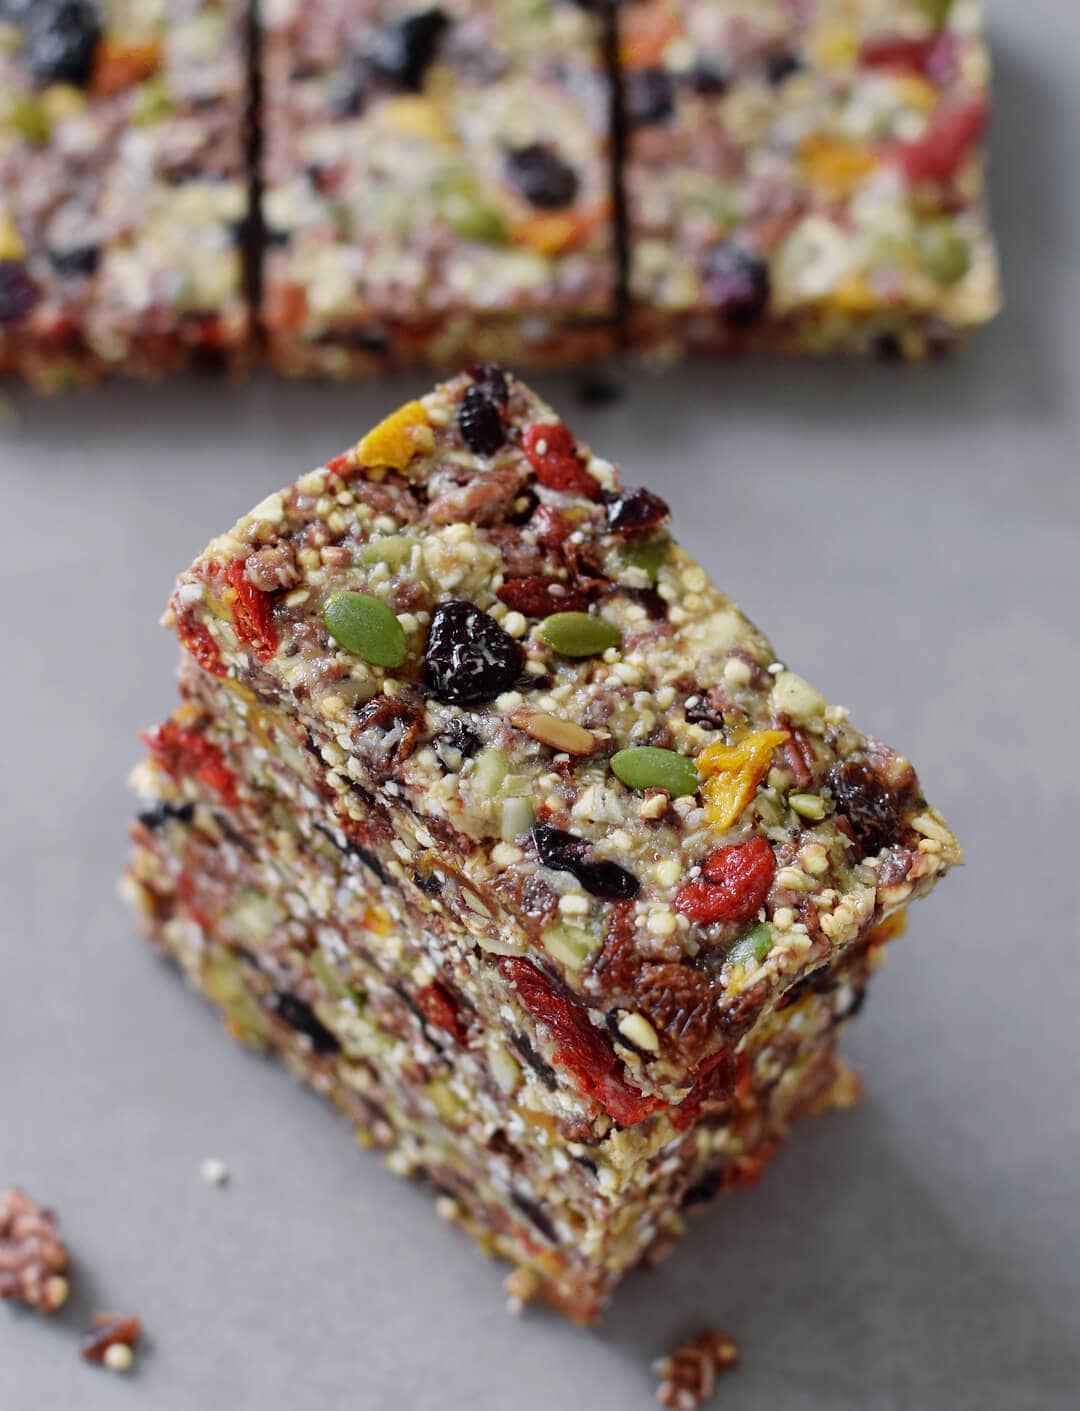 Stack of no-bake granola bars with dried fruit and seeds